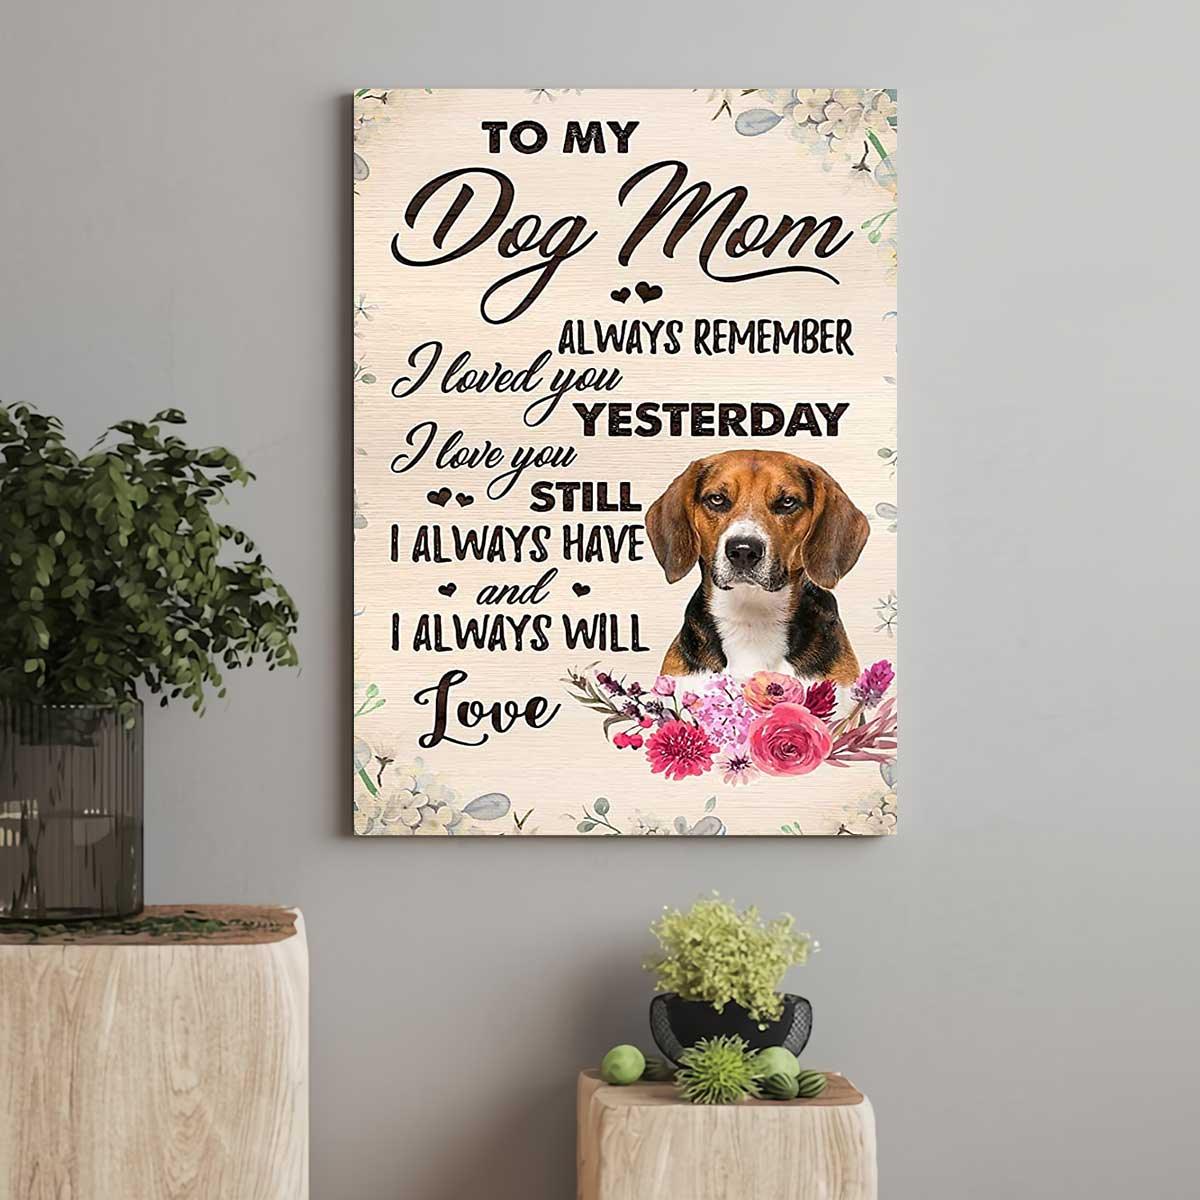 Beagle Portrait Canvas, To My Dog Mom Always Remember I Loved You Portrait Canvas, Premium Wrapped Canvas - Perfect Gift For Beagle Dog Owner - Amzanimalsgift